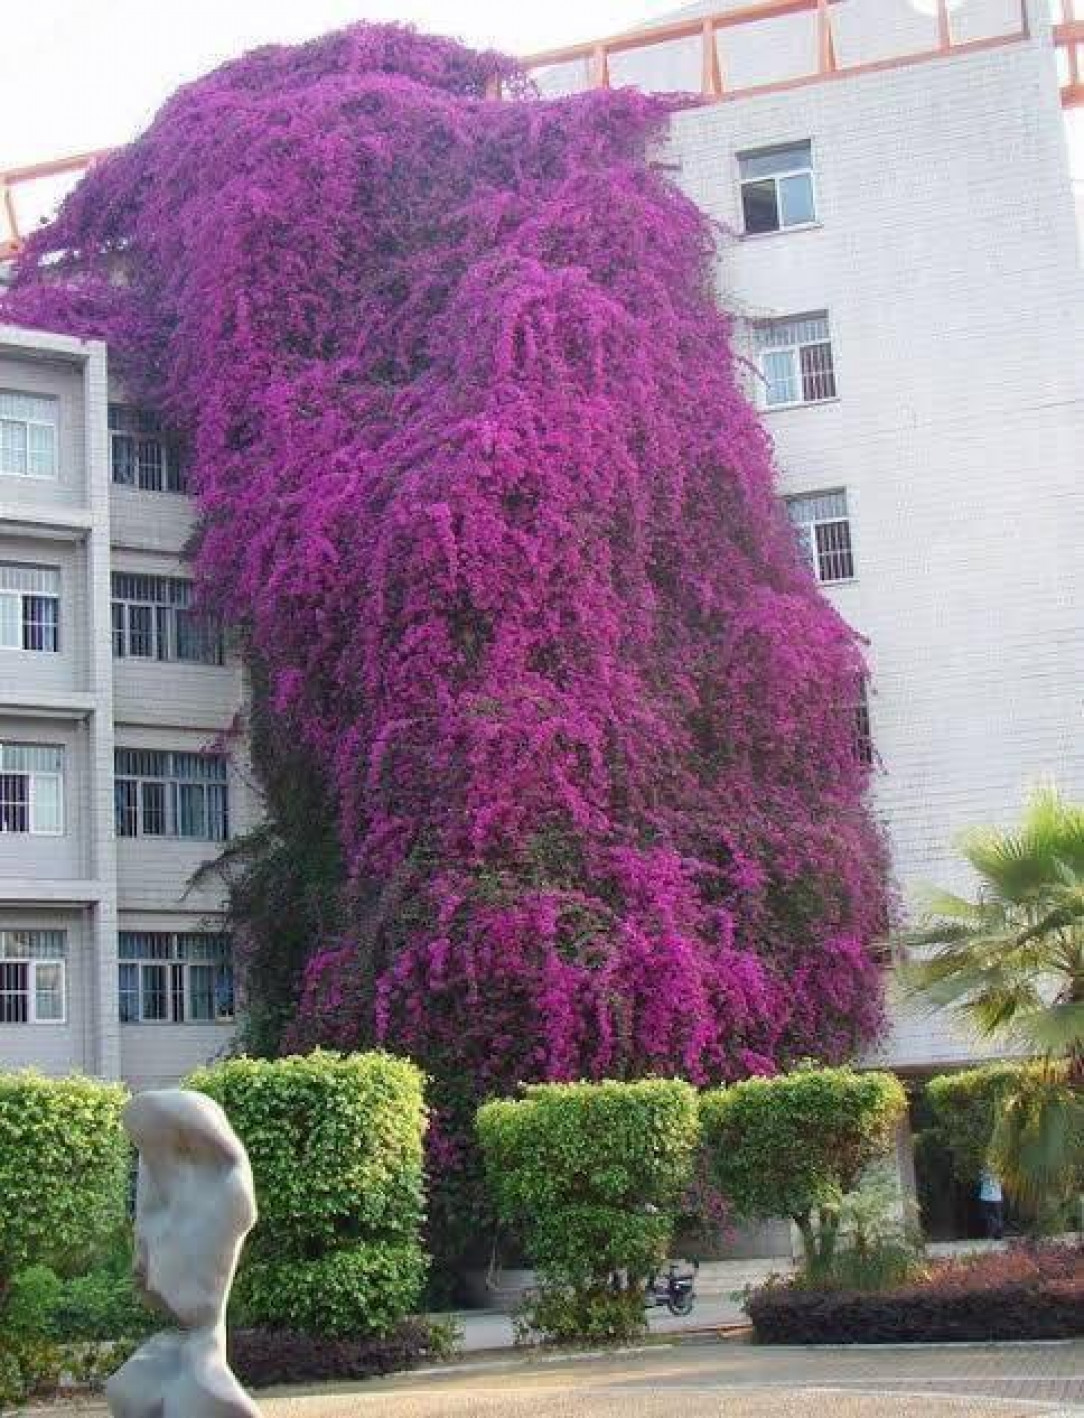 This Bougainvillea plant grew large enough to cover a building